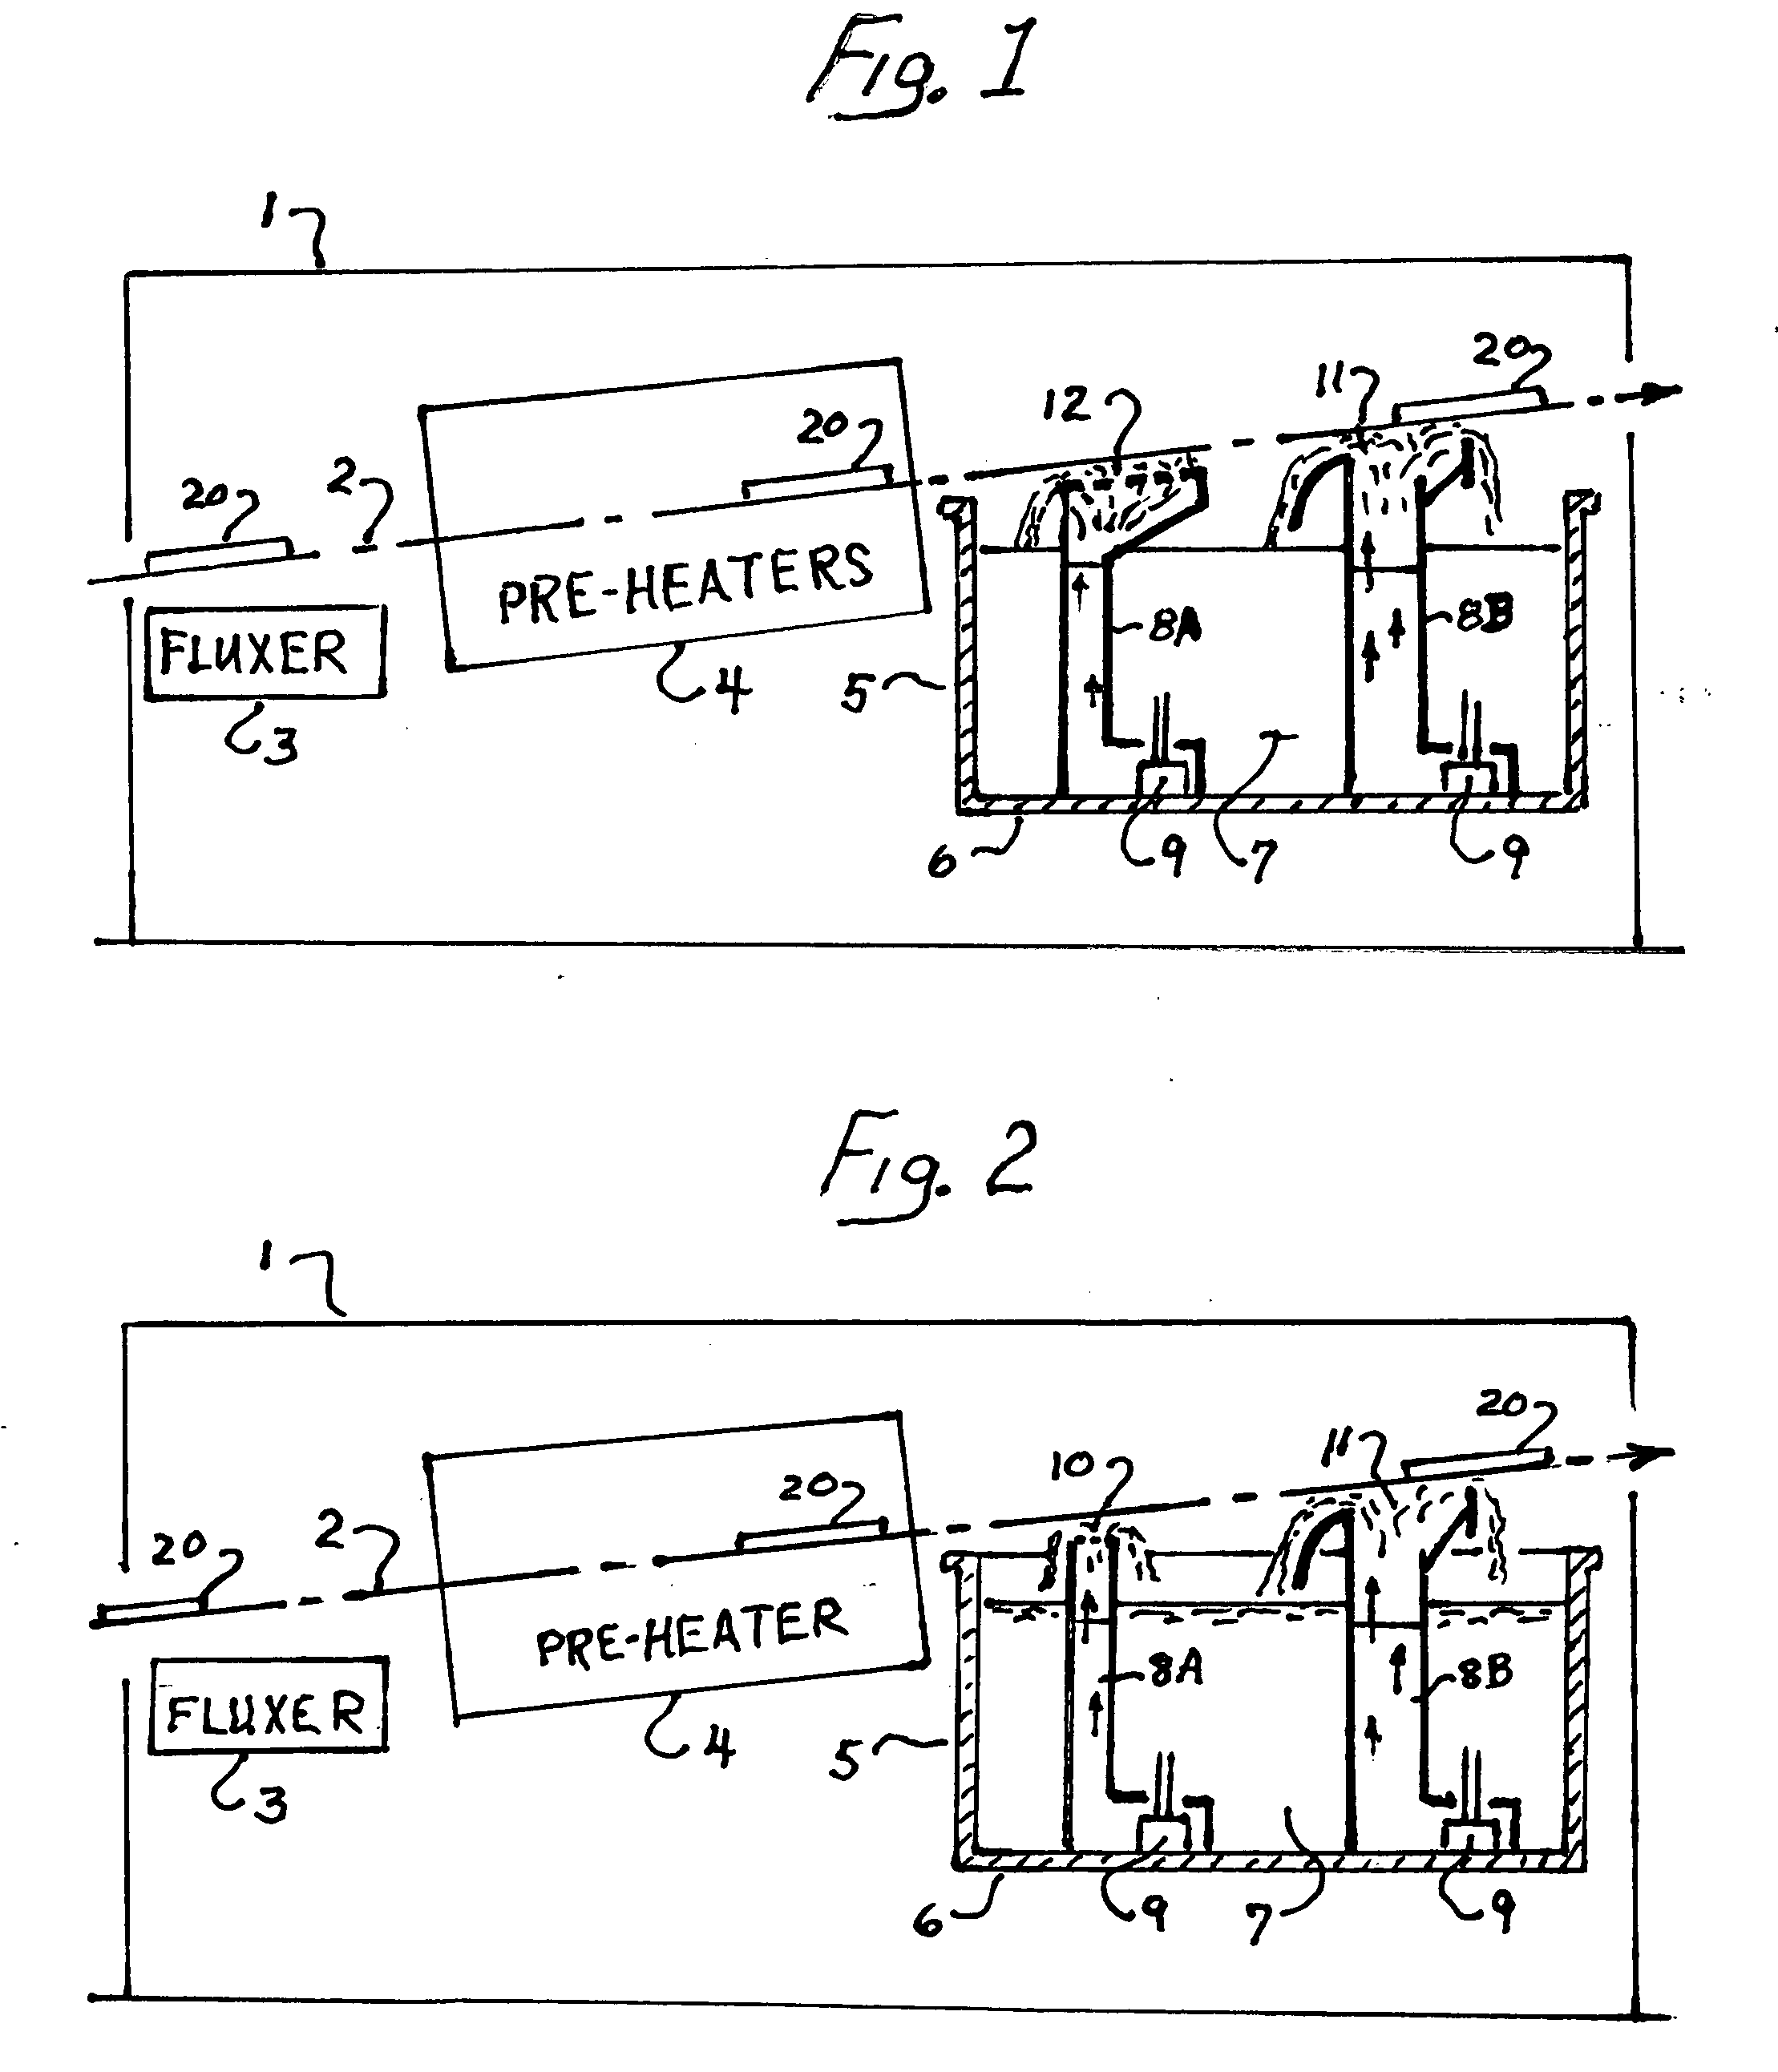 Wide wave apparatus for soldering an electronic assembly